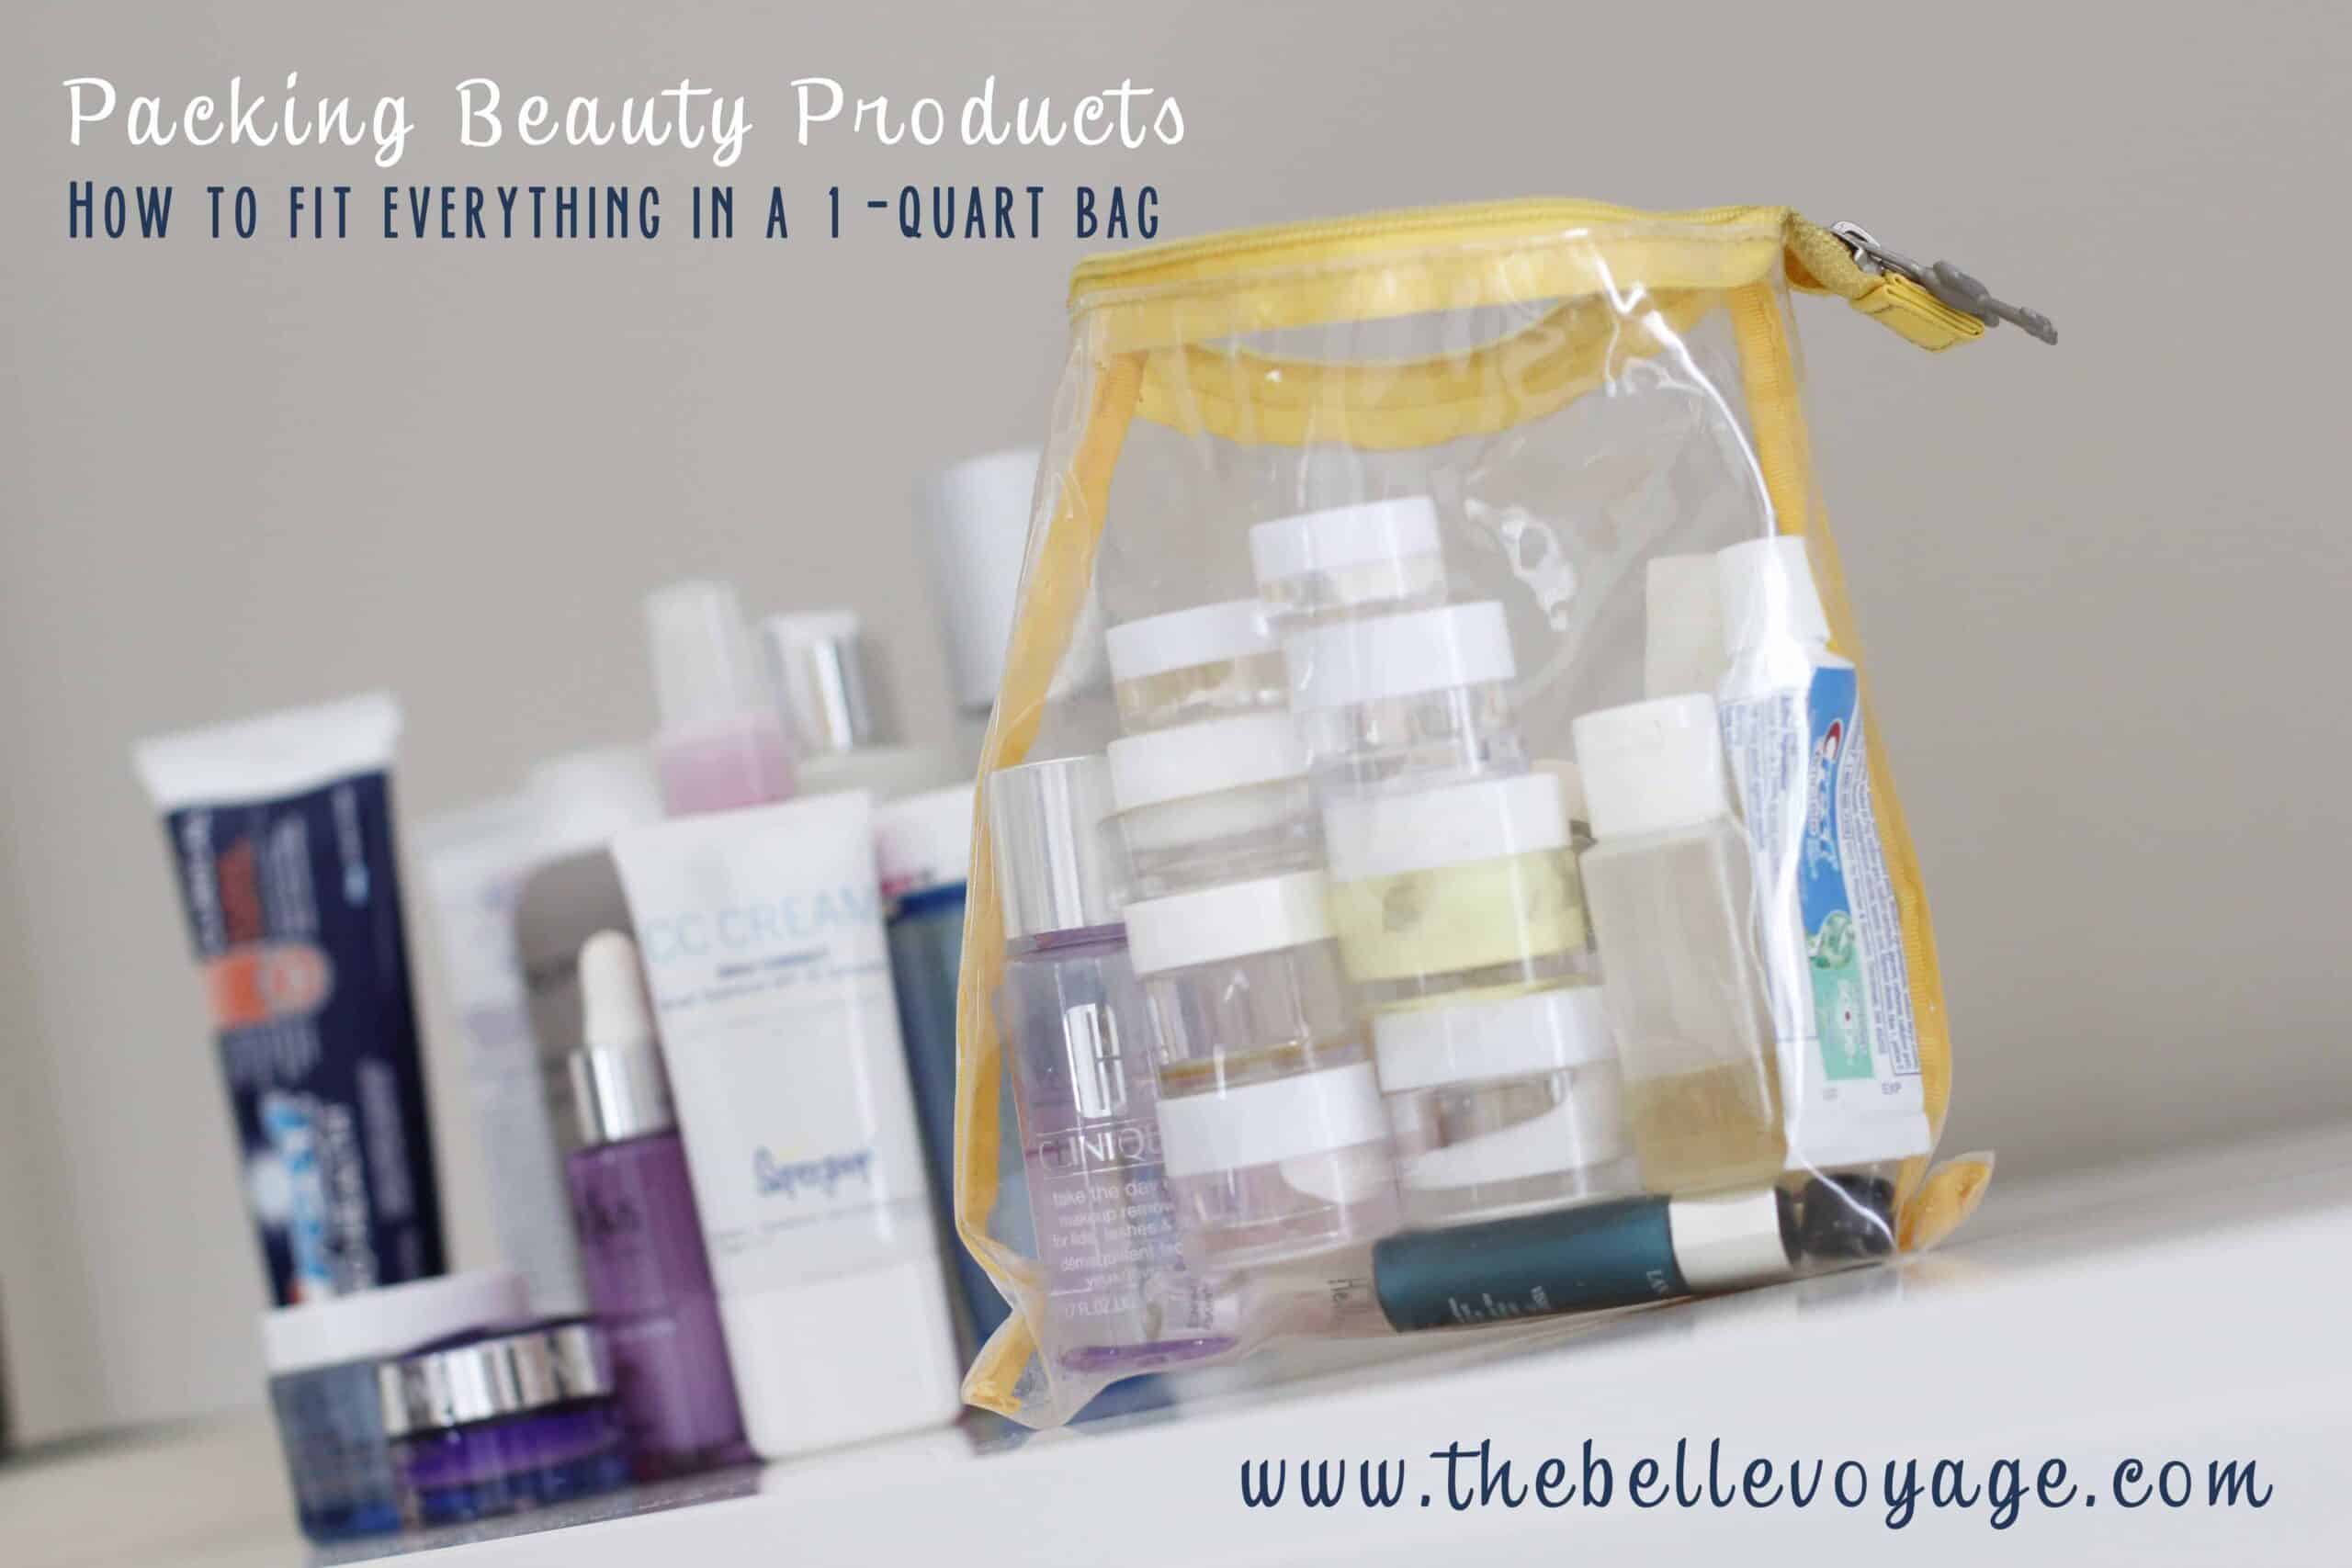 Packing Beauty Products for Travel